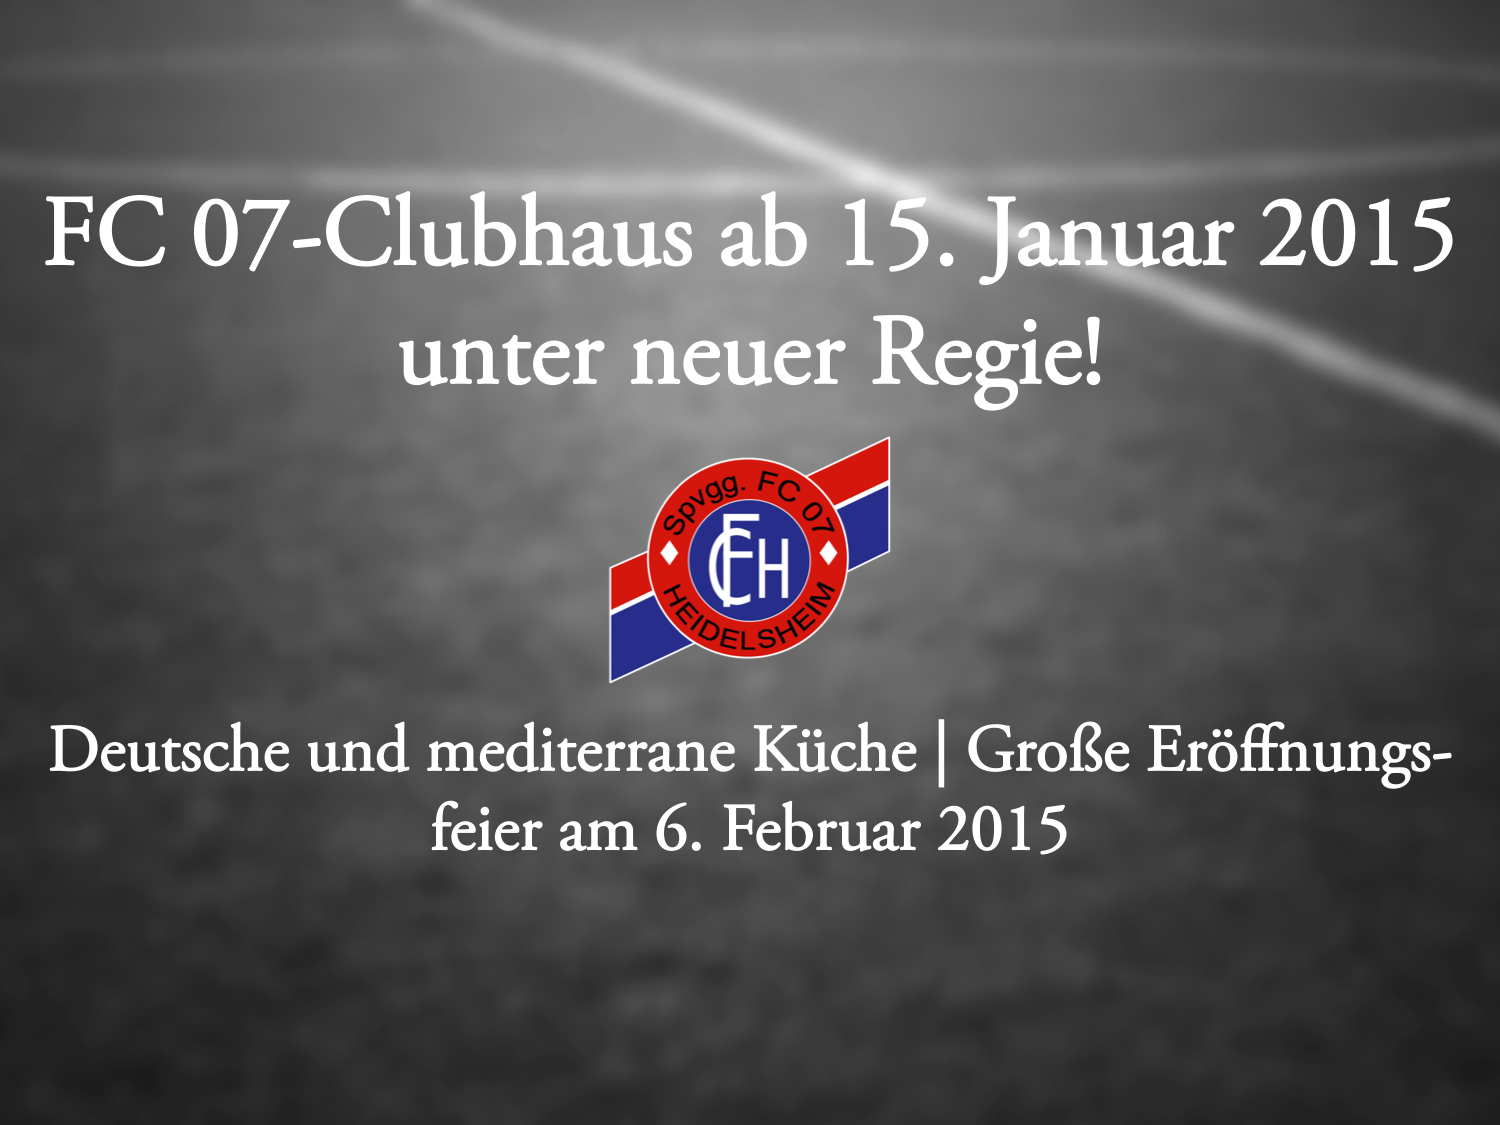 You are currently viewing FC 07-Clubhaus unter neuer Regie!